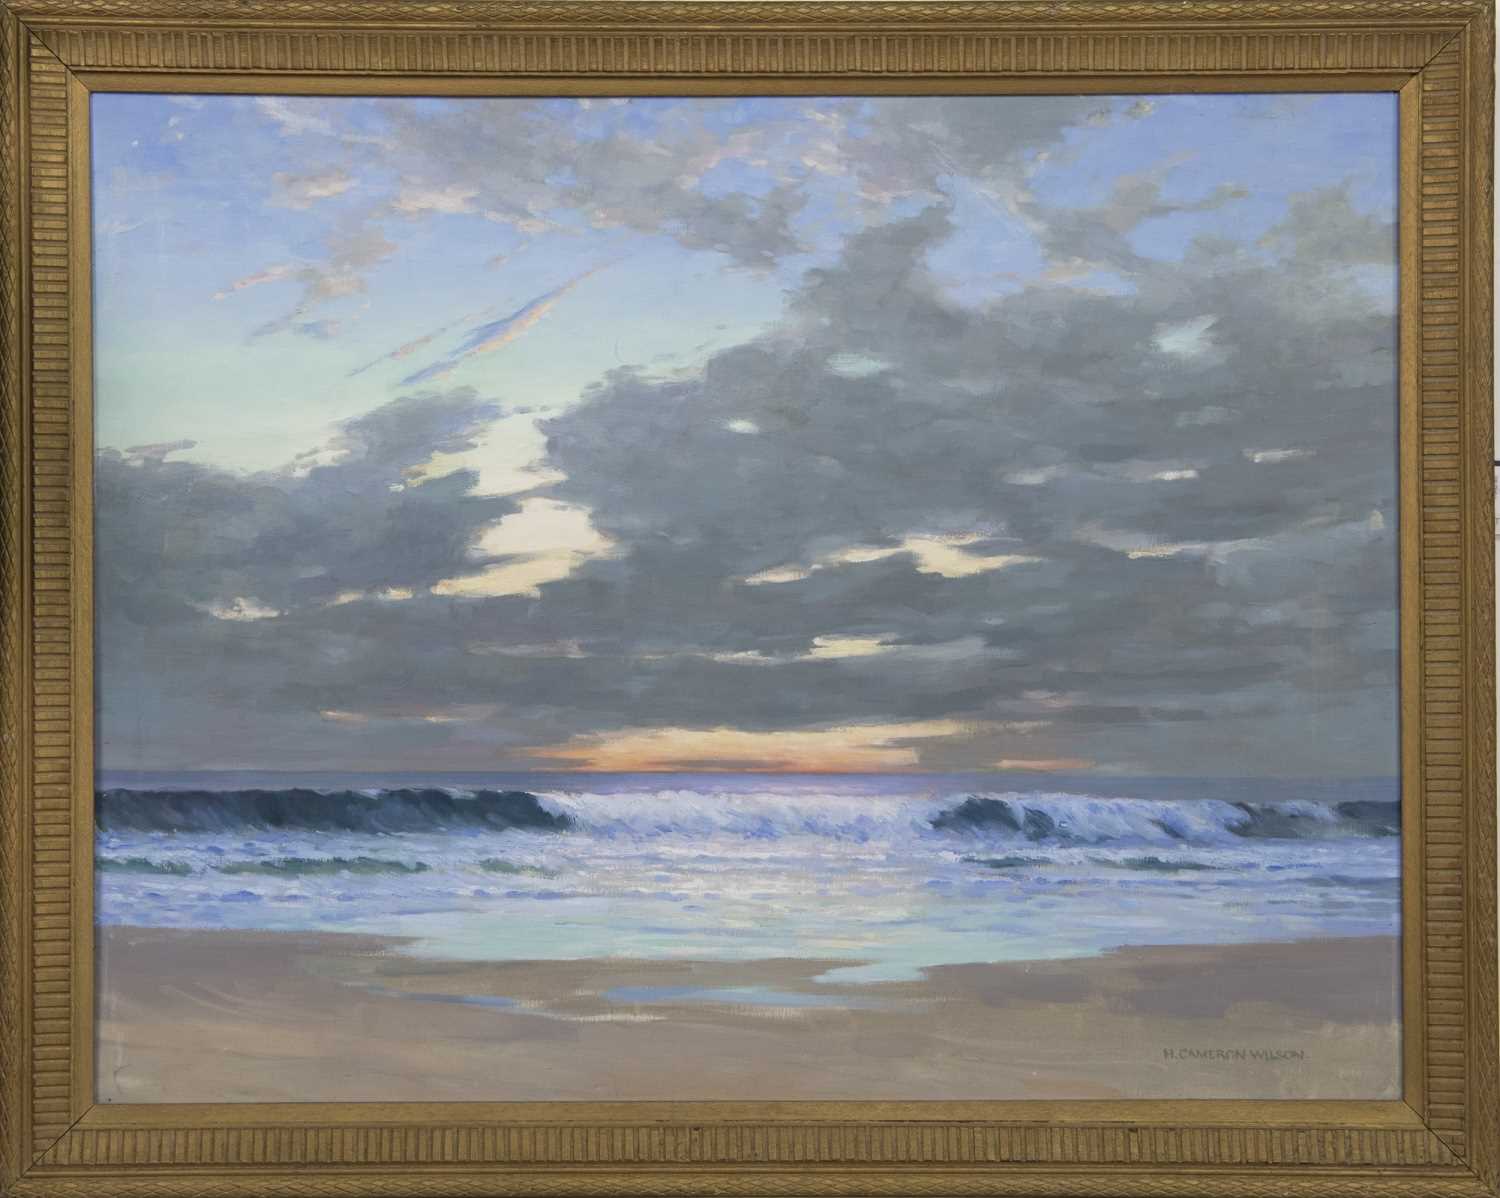 Lot 289 - THE GOING DOWN OF THE SUN, AN OIL BY HUGH CAMERON WILSON